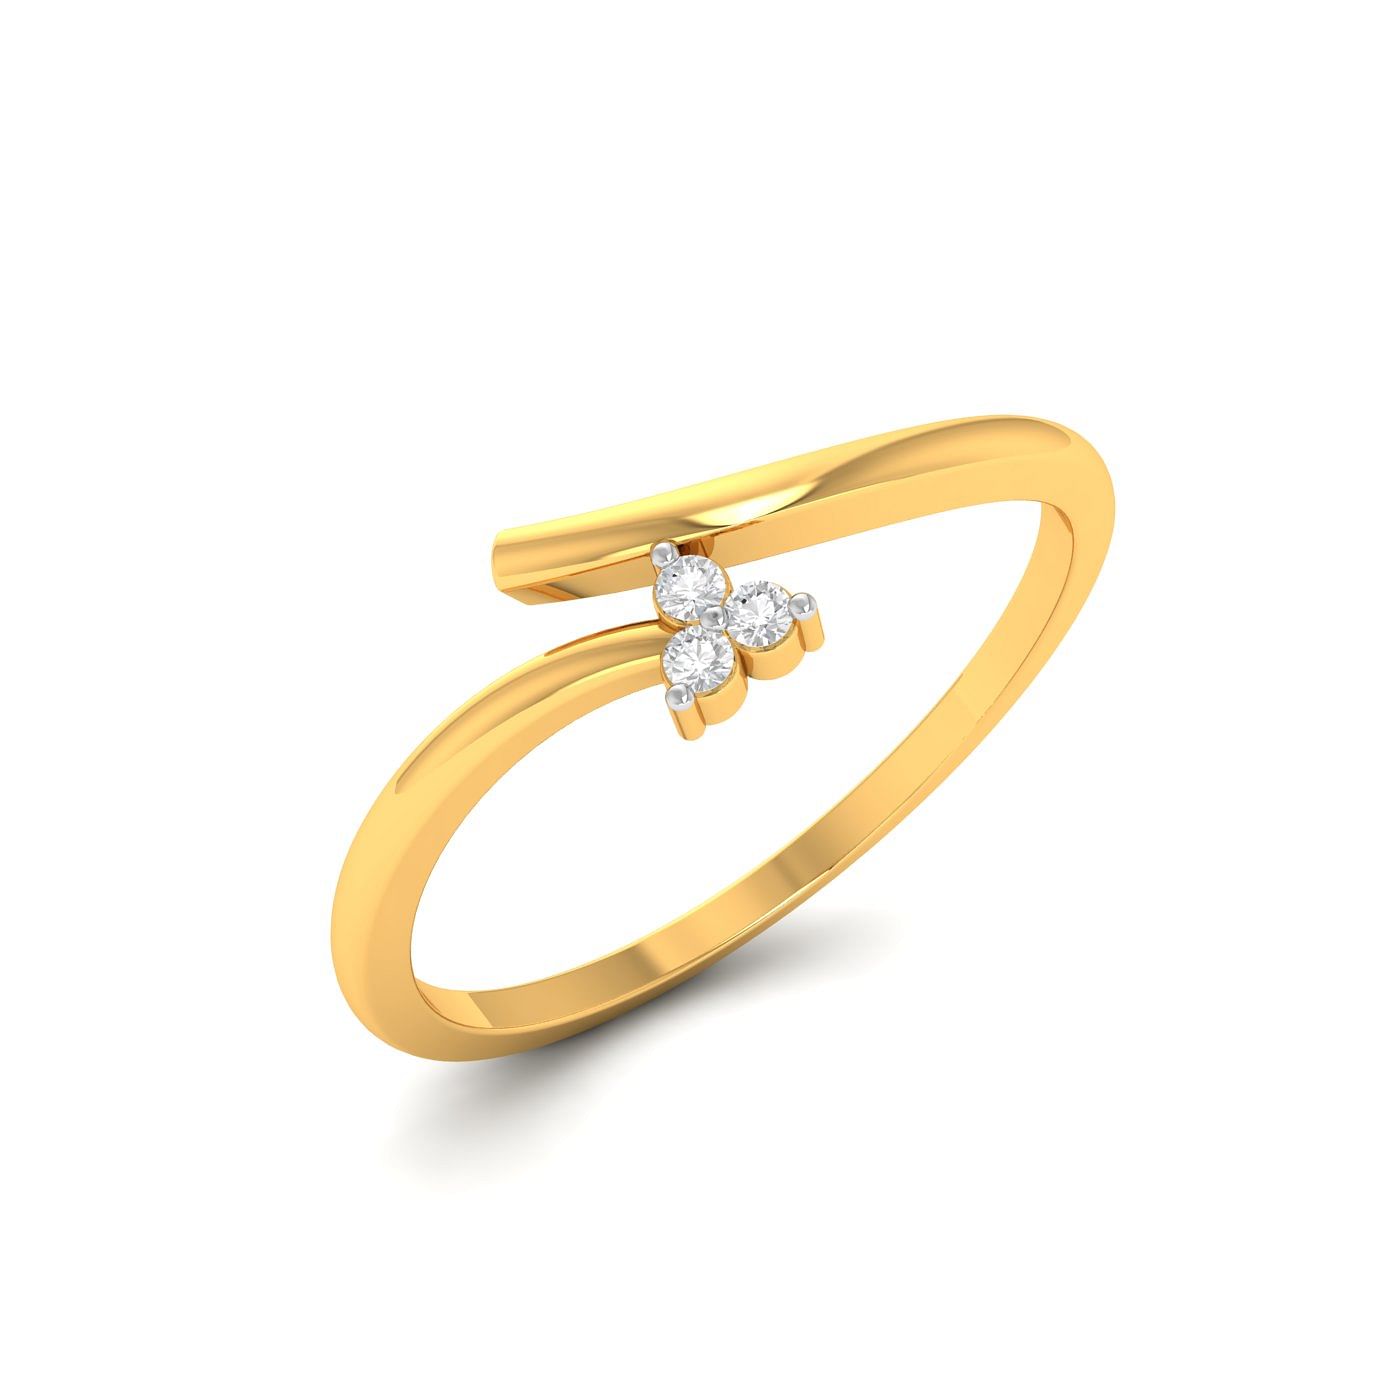 Light weight classic design Three Stone Delicate Diamond Ring for gift